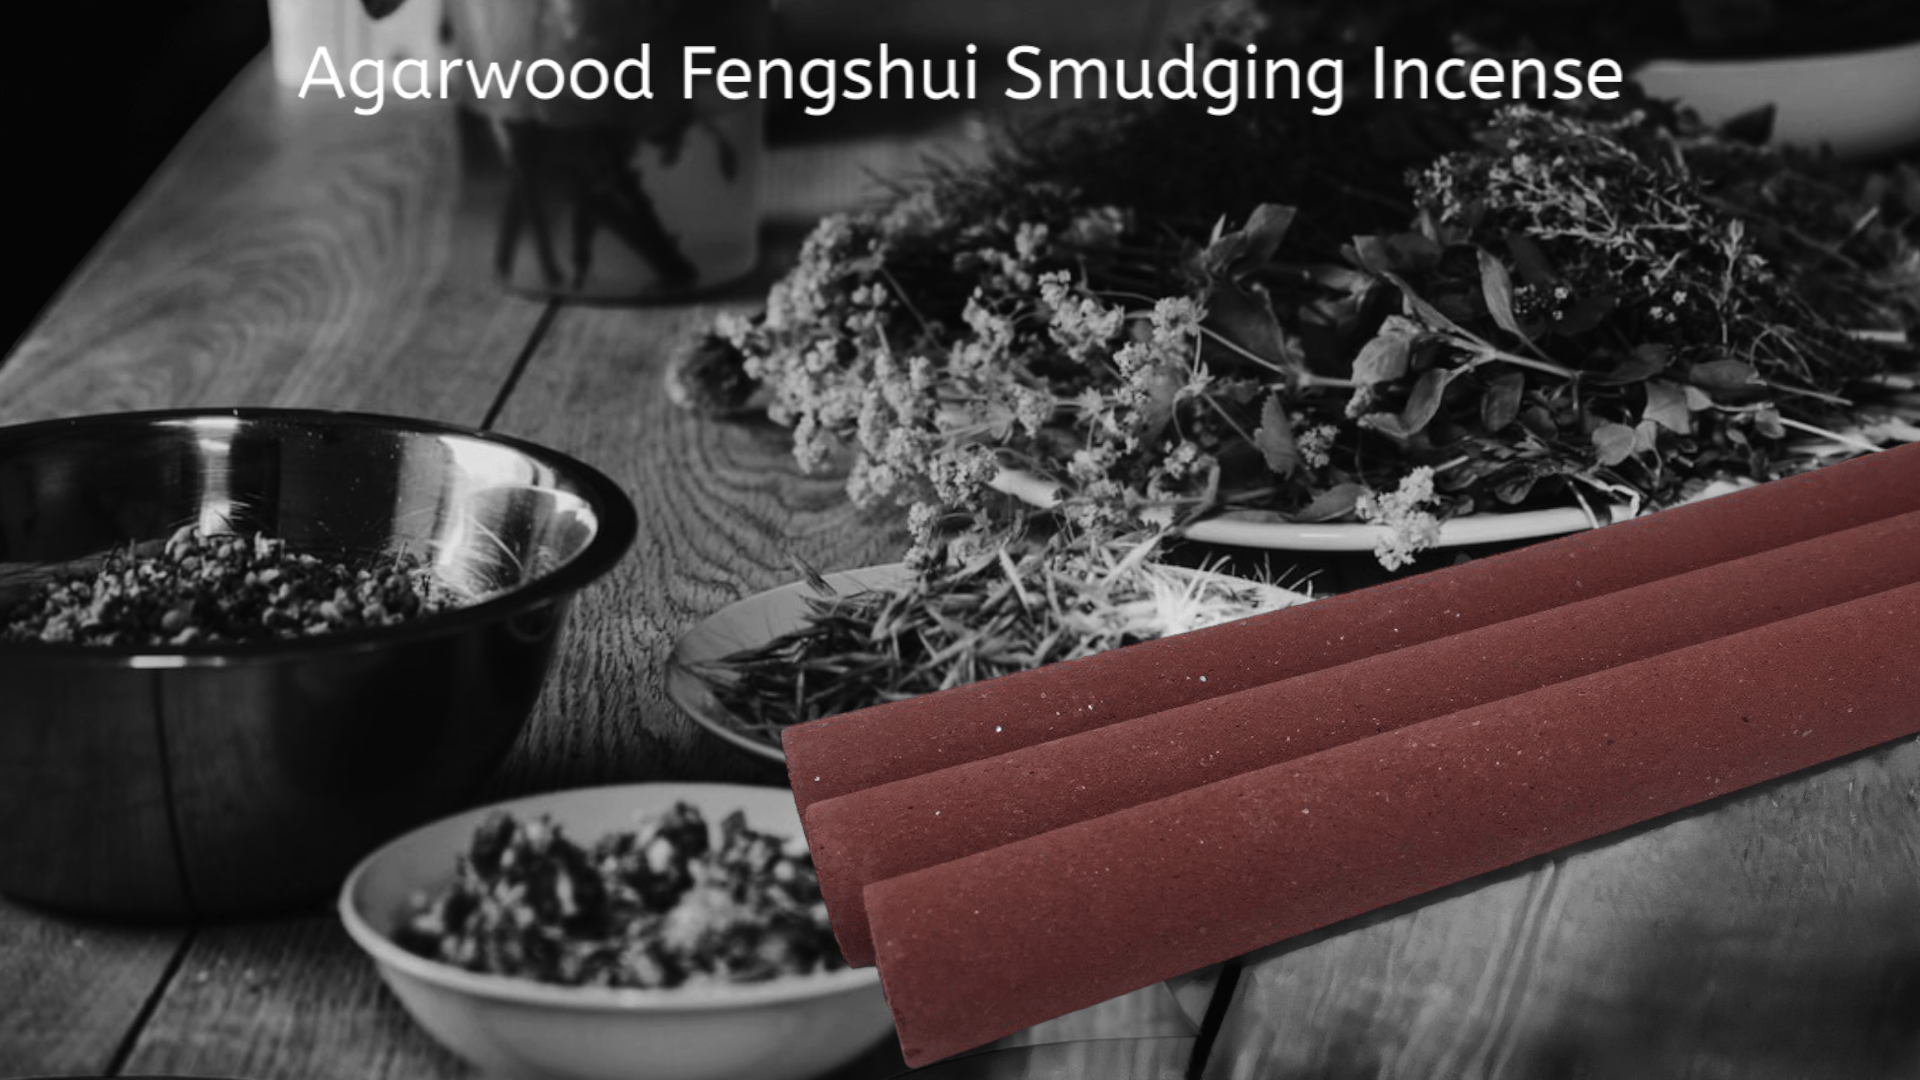 Agarwood Fengshui Smudging Incense made with Agarwood and 42 herbs -